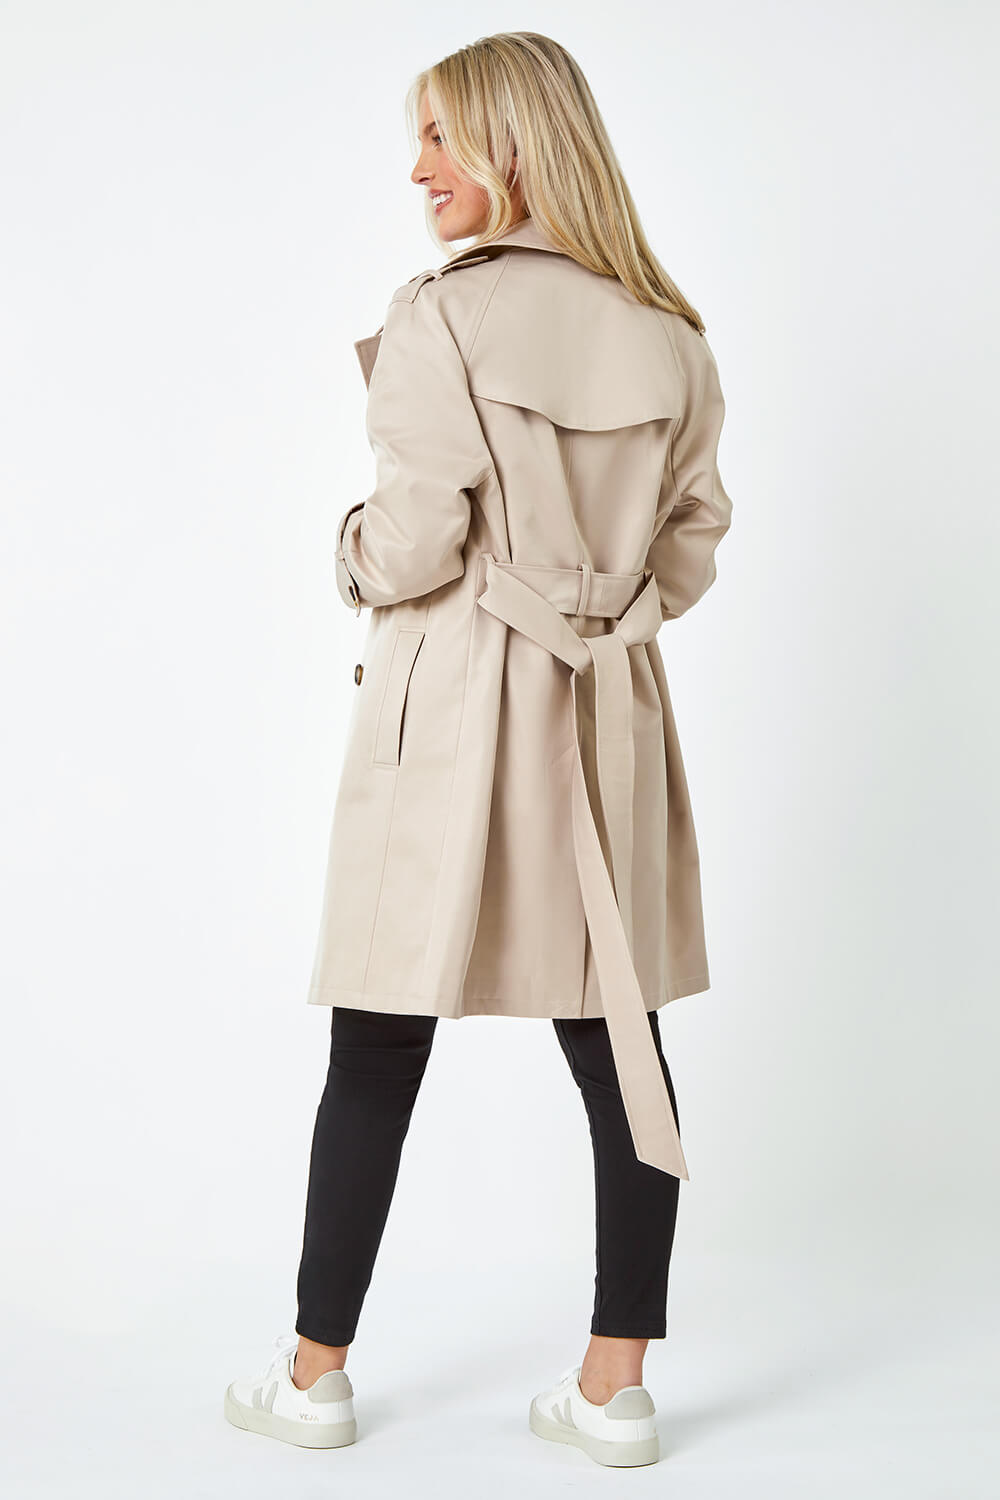 Stone Petite Double Breasted Trench Coat, Image 3 of 6